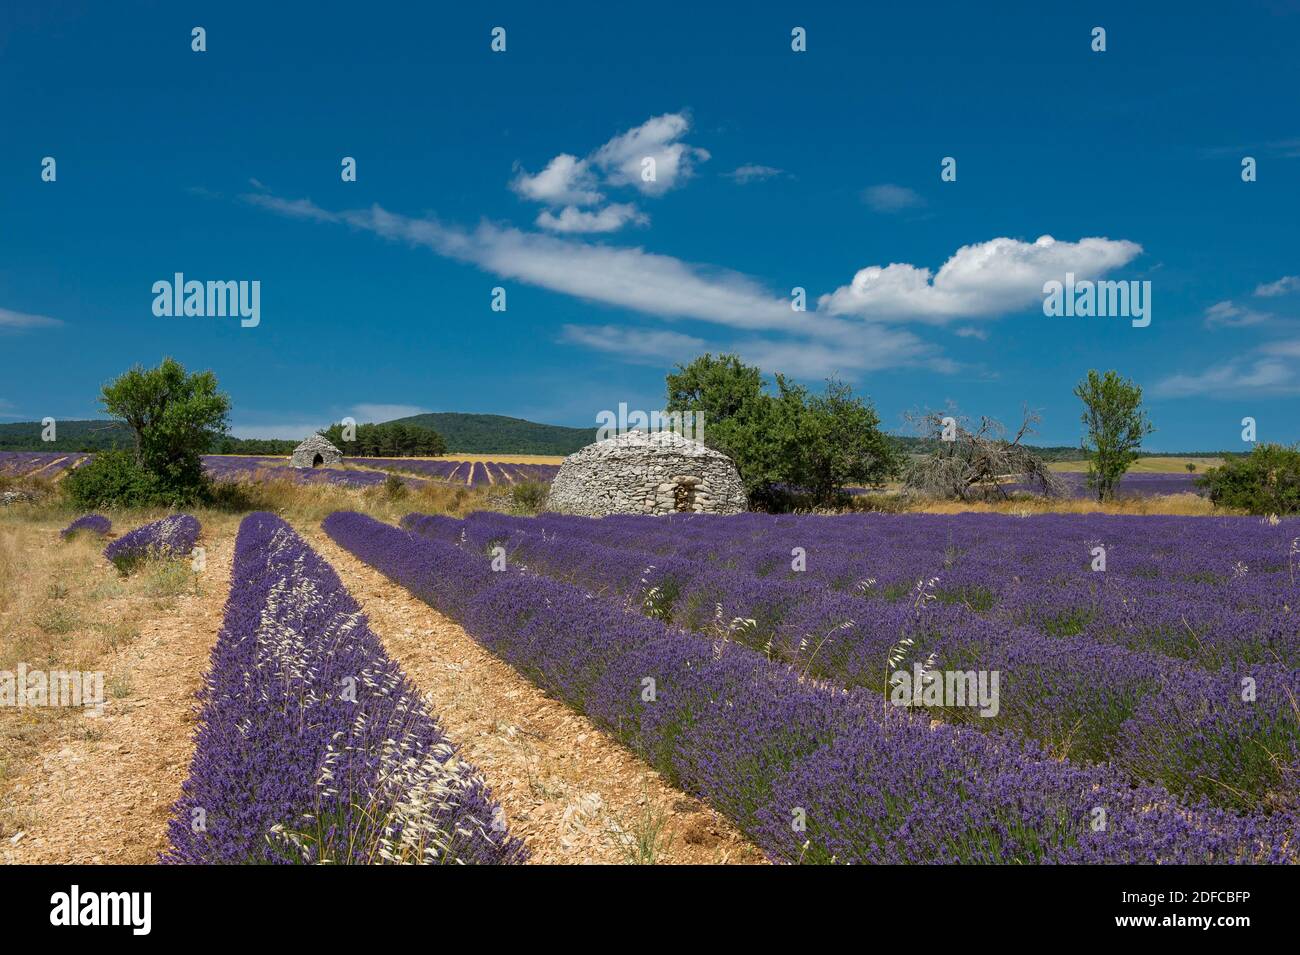 France, Drome, Ferrassieres, idyl landscape of boria in the middle of lavender fields with flowers Stock Photo